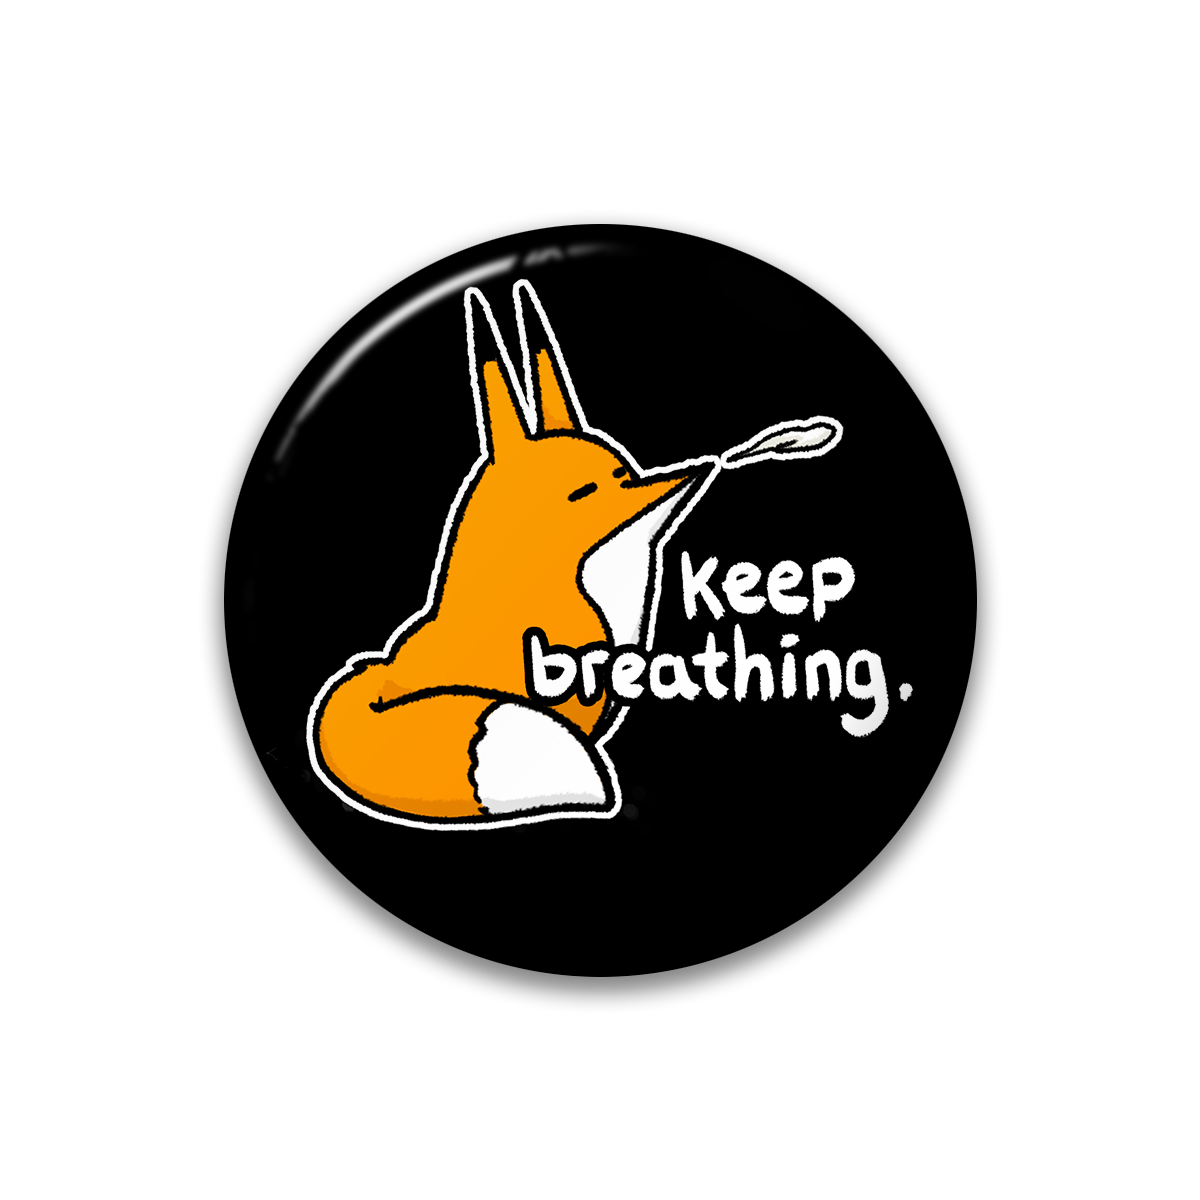 Keep Breathing Button